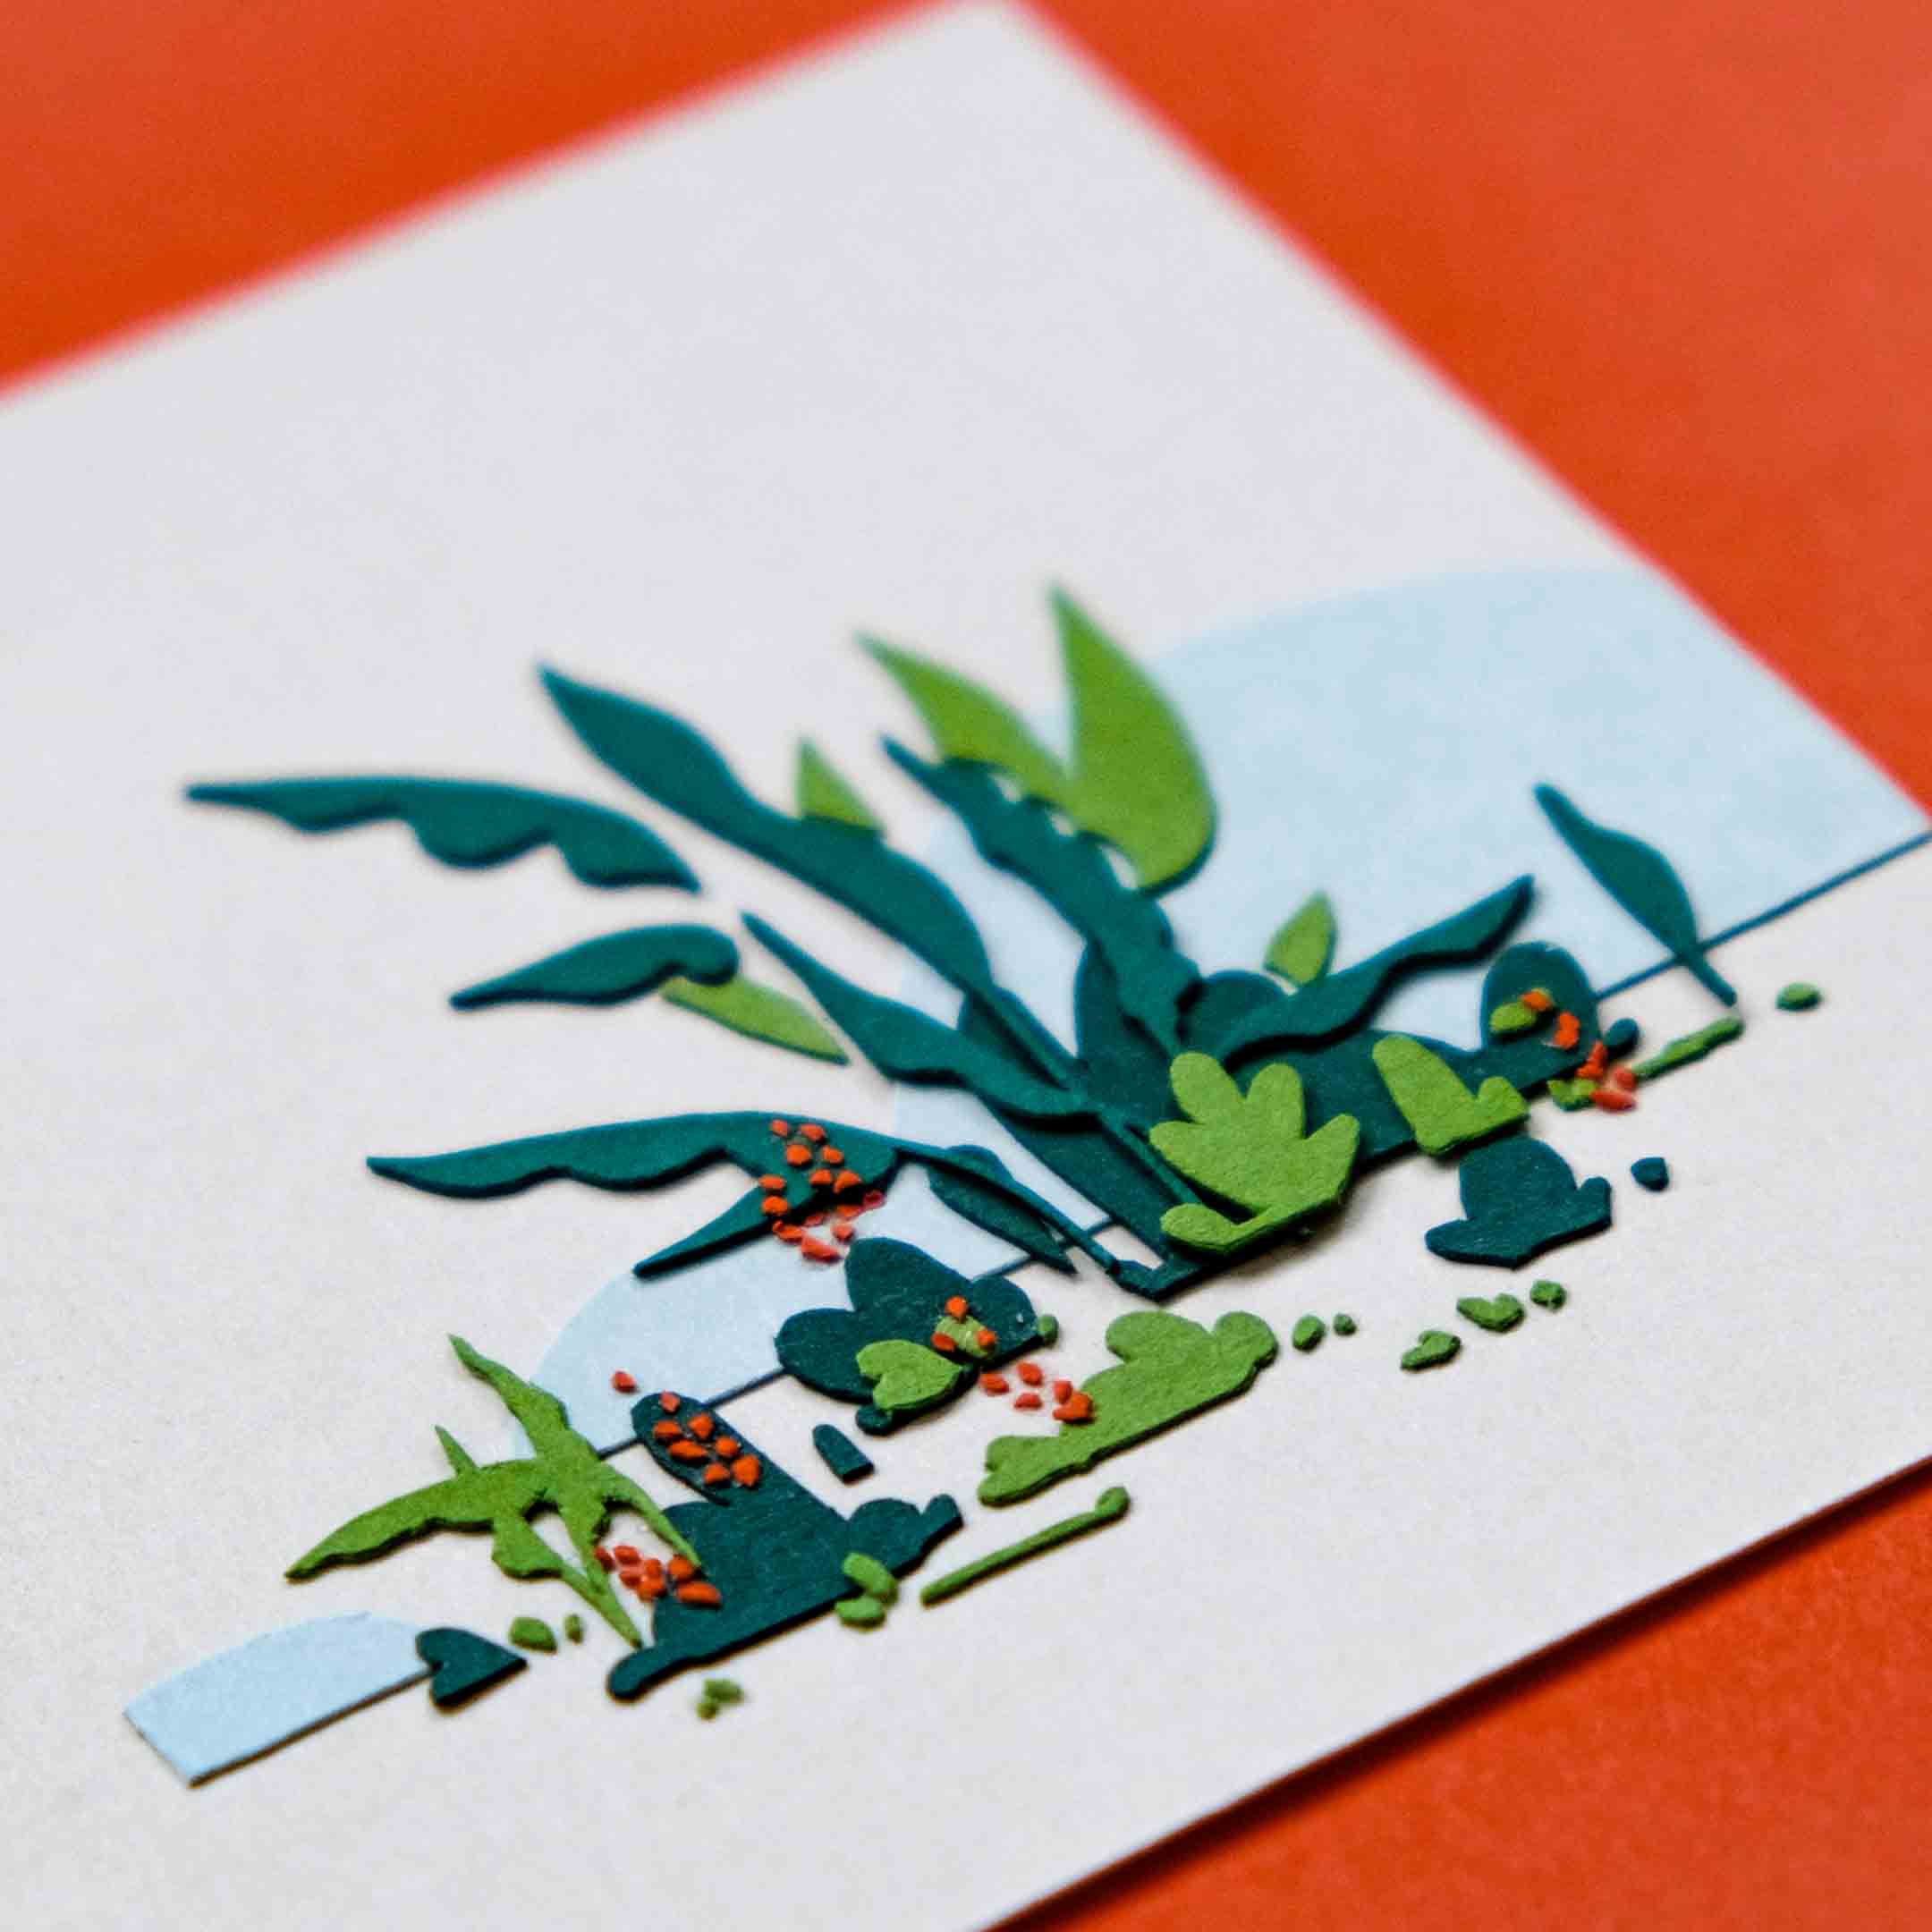 An angled view of a small square artwork shows layers of green paper tropical plants in front of blue paper hills. The artwork is on an orange backdrop.